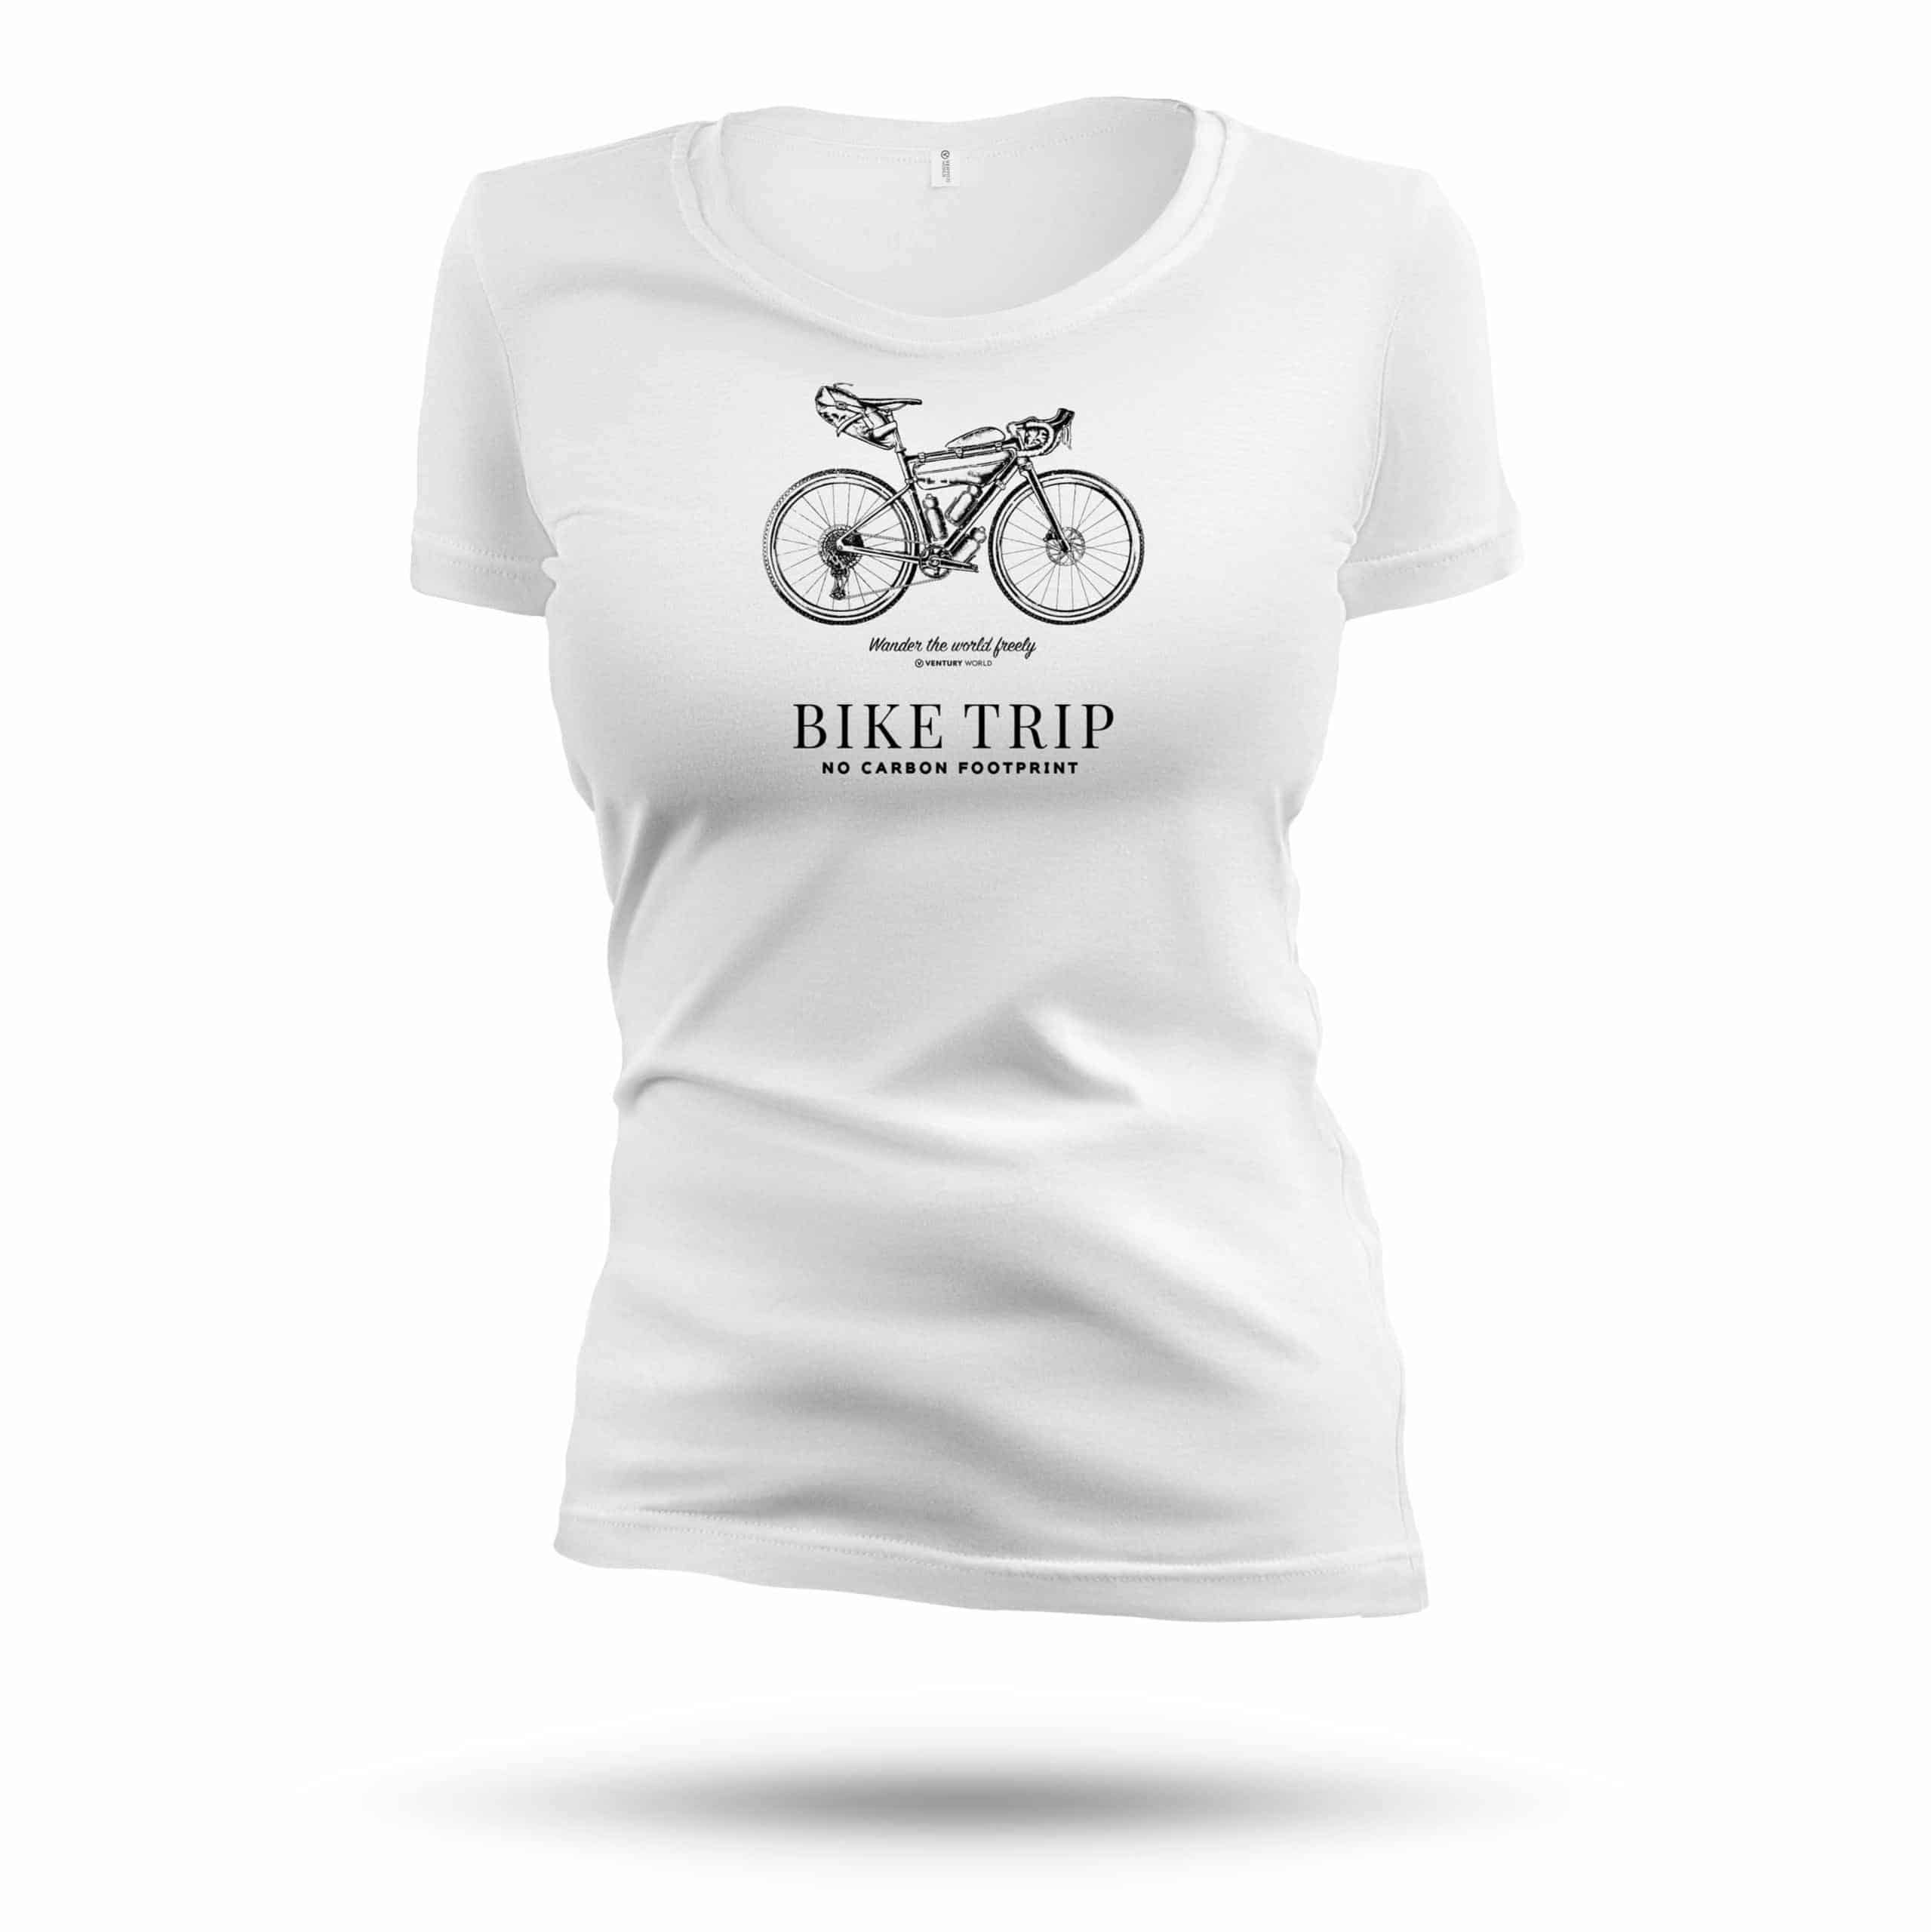 Women's cycling t-shirt - Travel Bike bikepacking - Wander the world freely - collection T-shirt live freely 100% Natural fitted size large round neck.